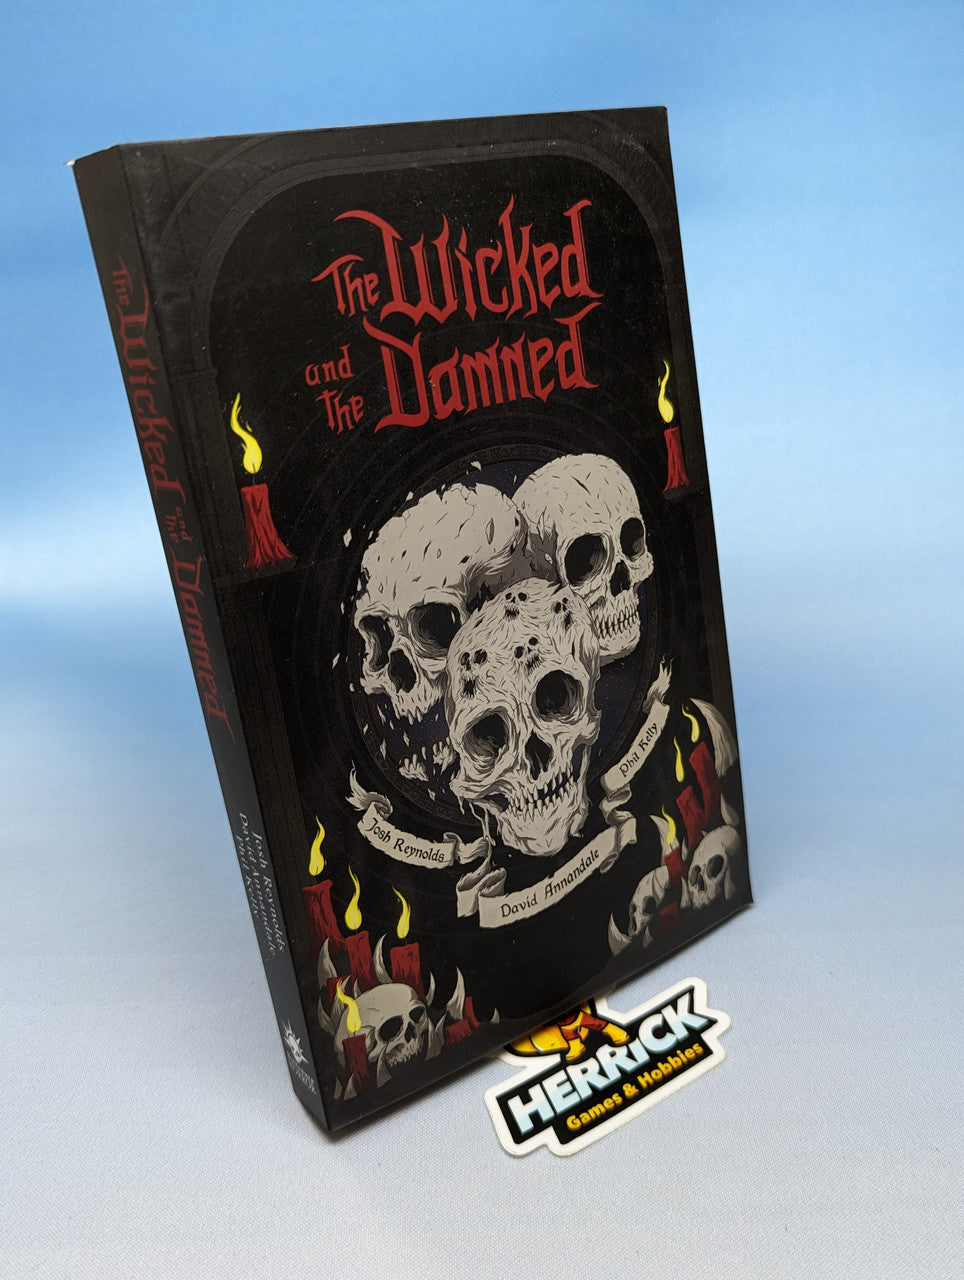 Novel: The Wicked And The Damned